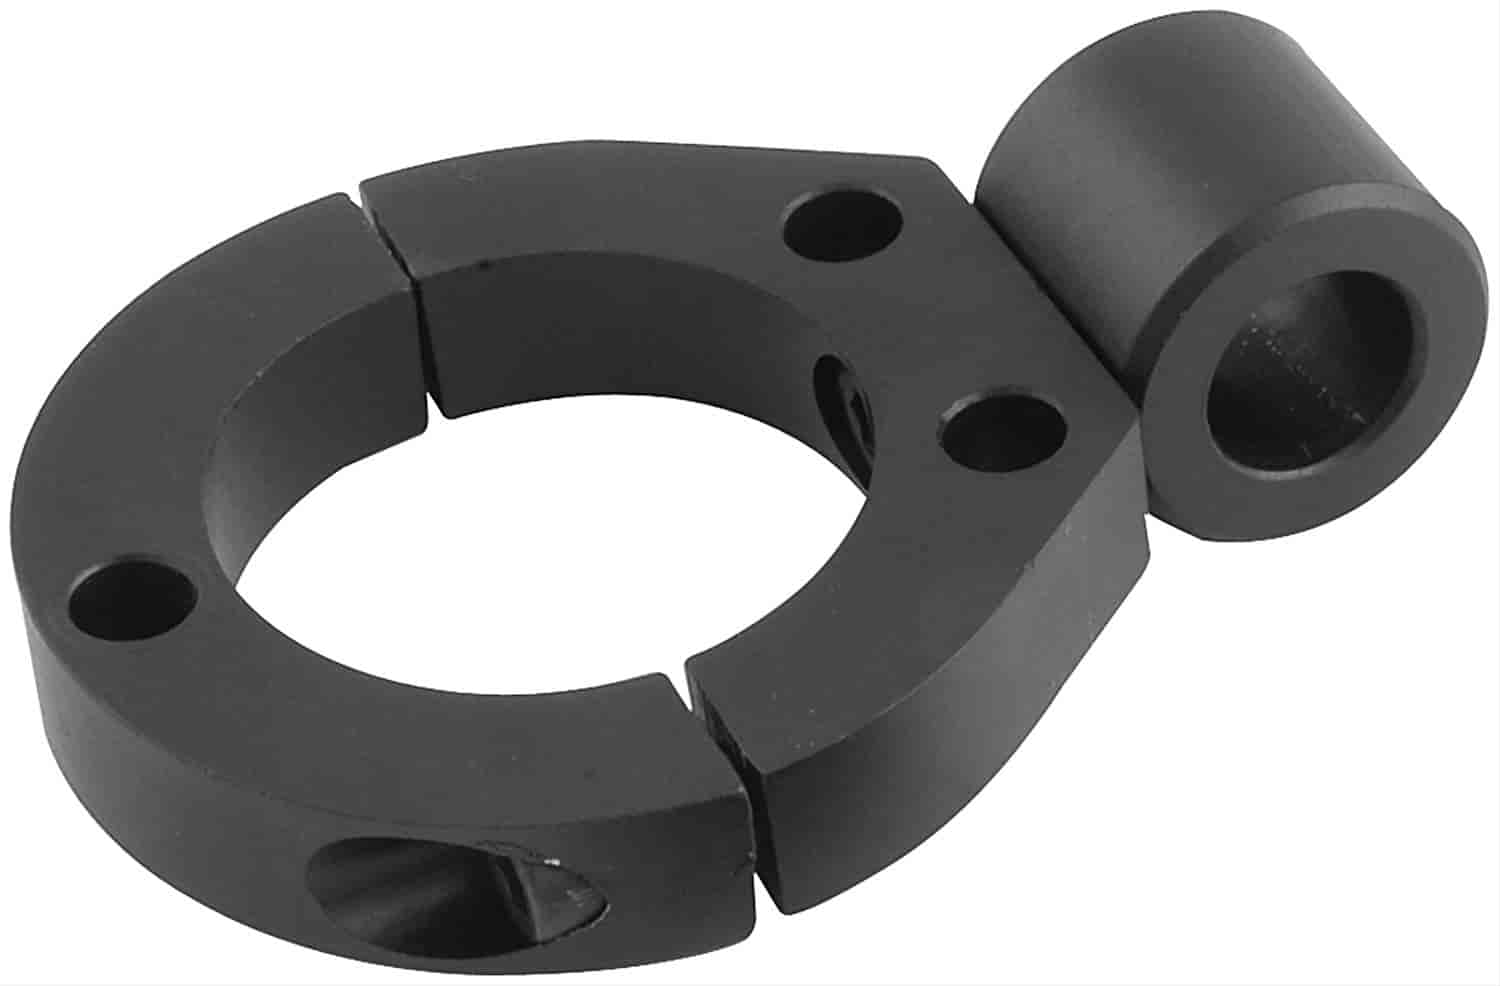 Replacement Clamp-On Bracket 1-3/4" Swivel